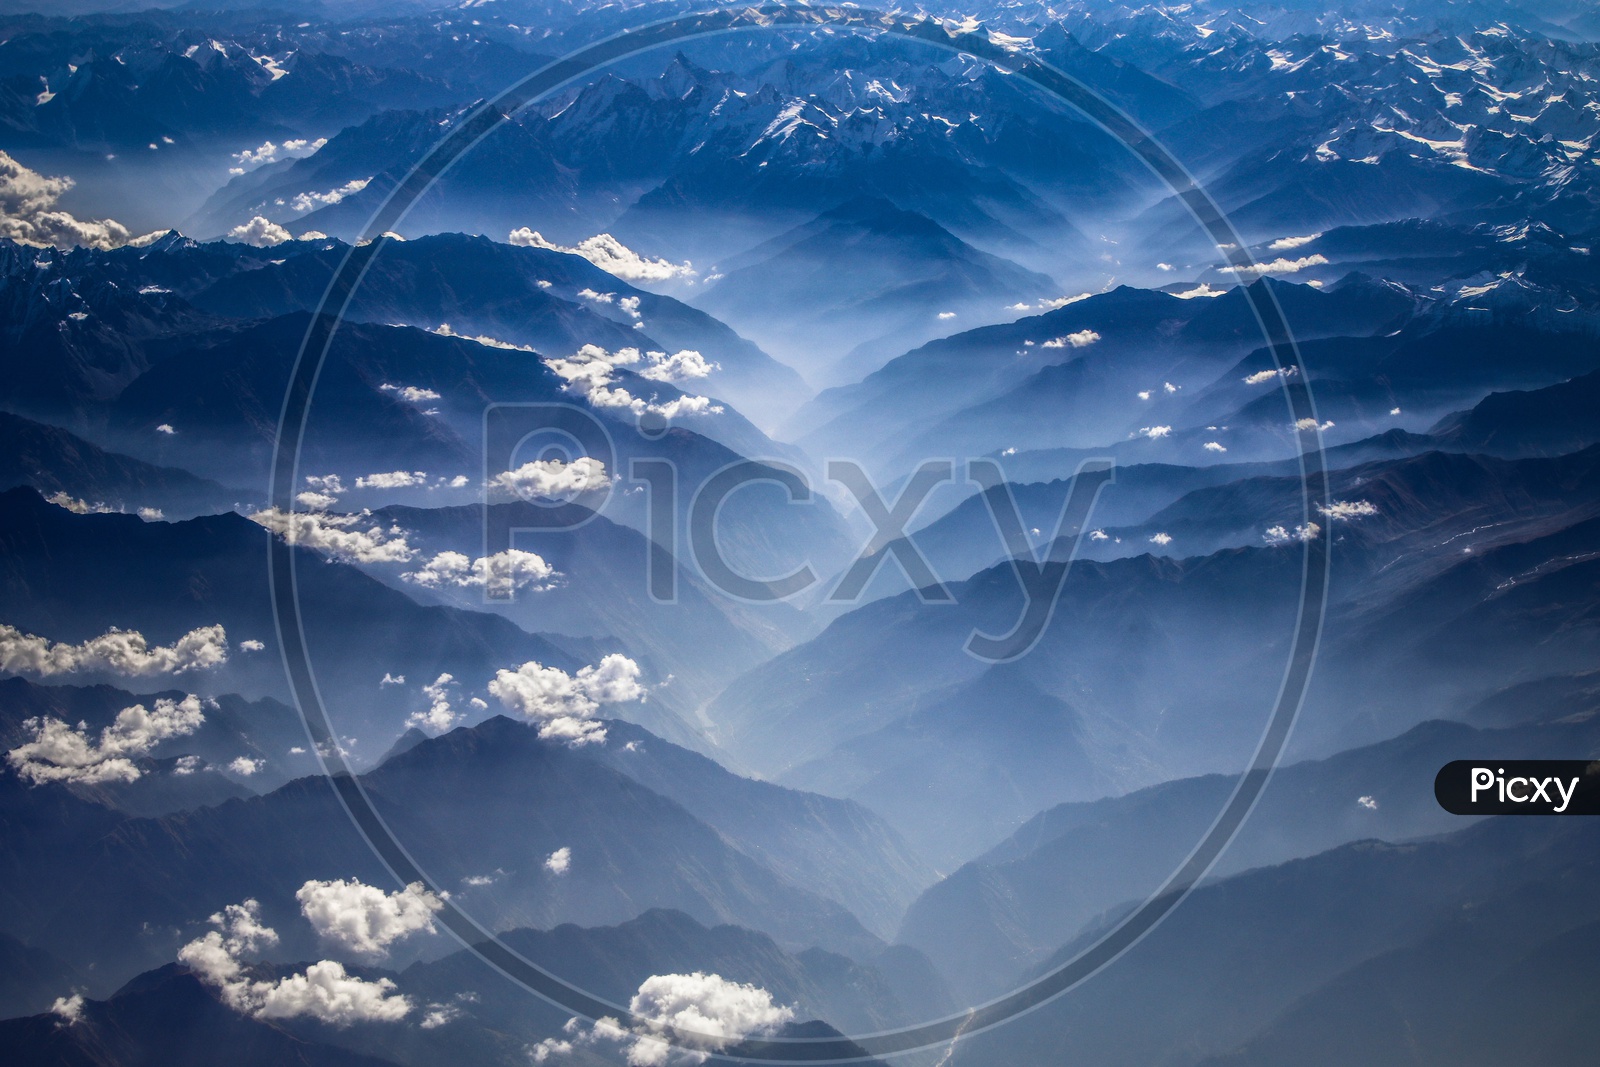 Layer like structure formation of Hills and Mountains of Himalayas with clouds above them